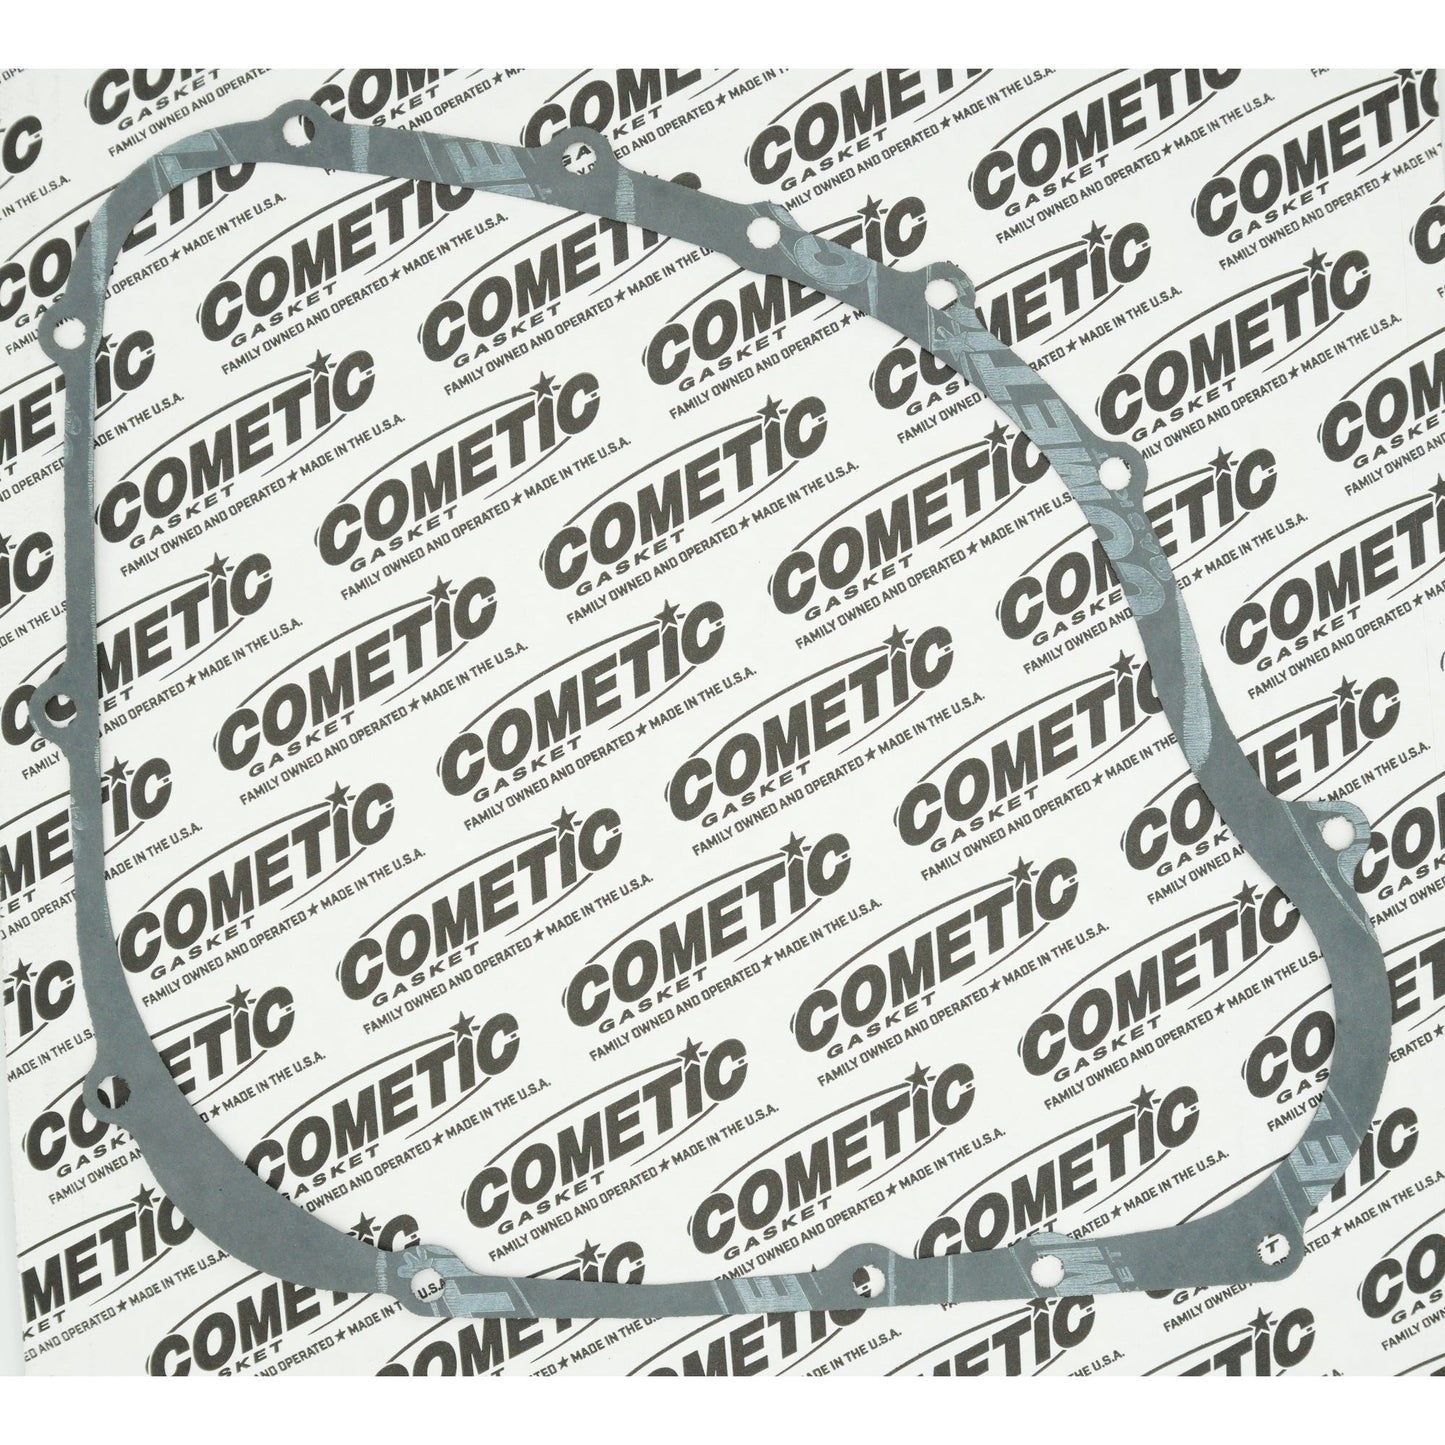 Cometic Honda CBX Clutch Cover Gasket on Cometic background